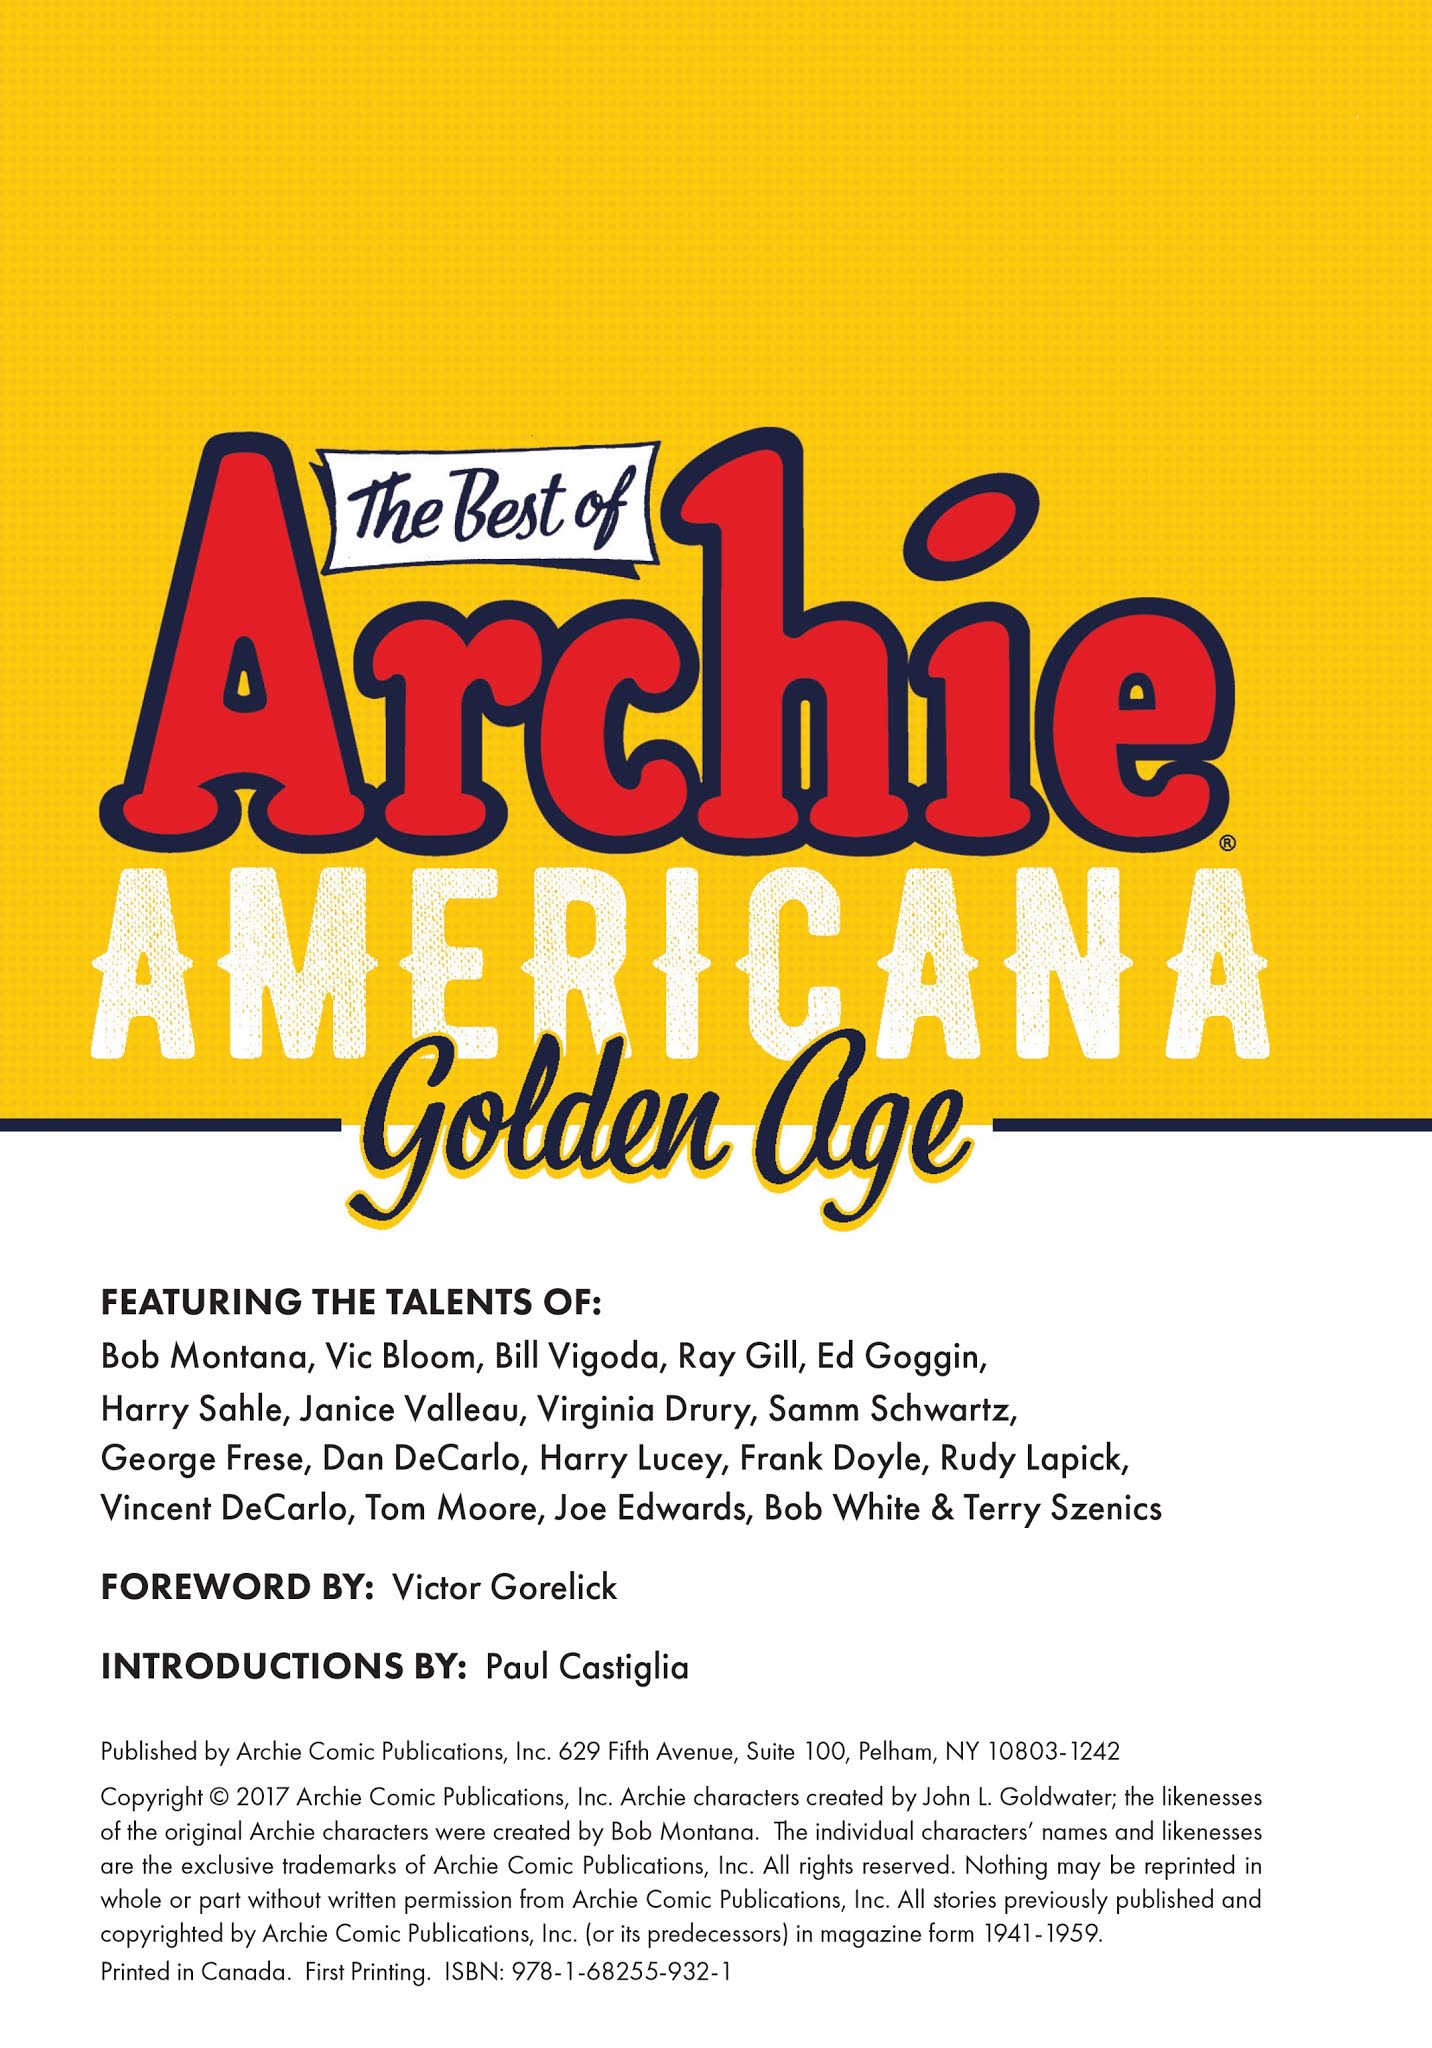 Read online Best of Archie Americana comic -  Issue # TPB 1 (Part 1) - 4